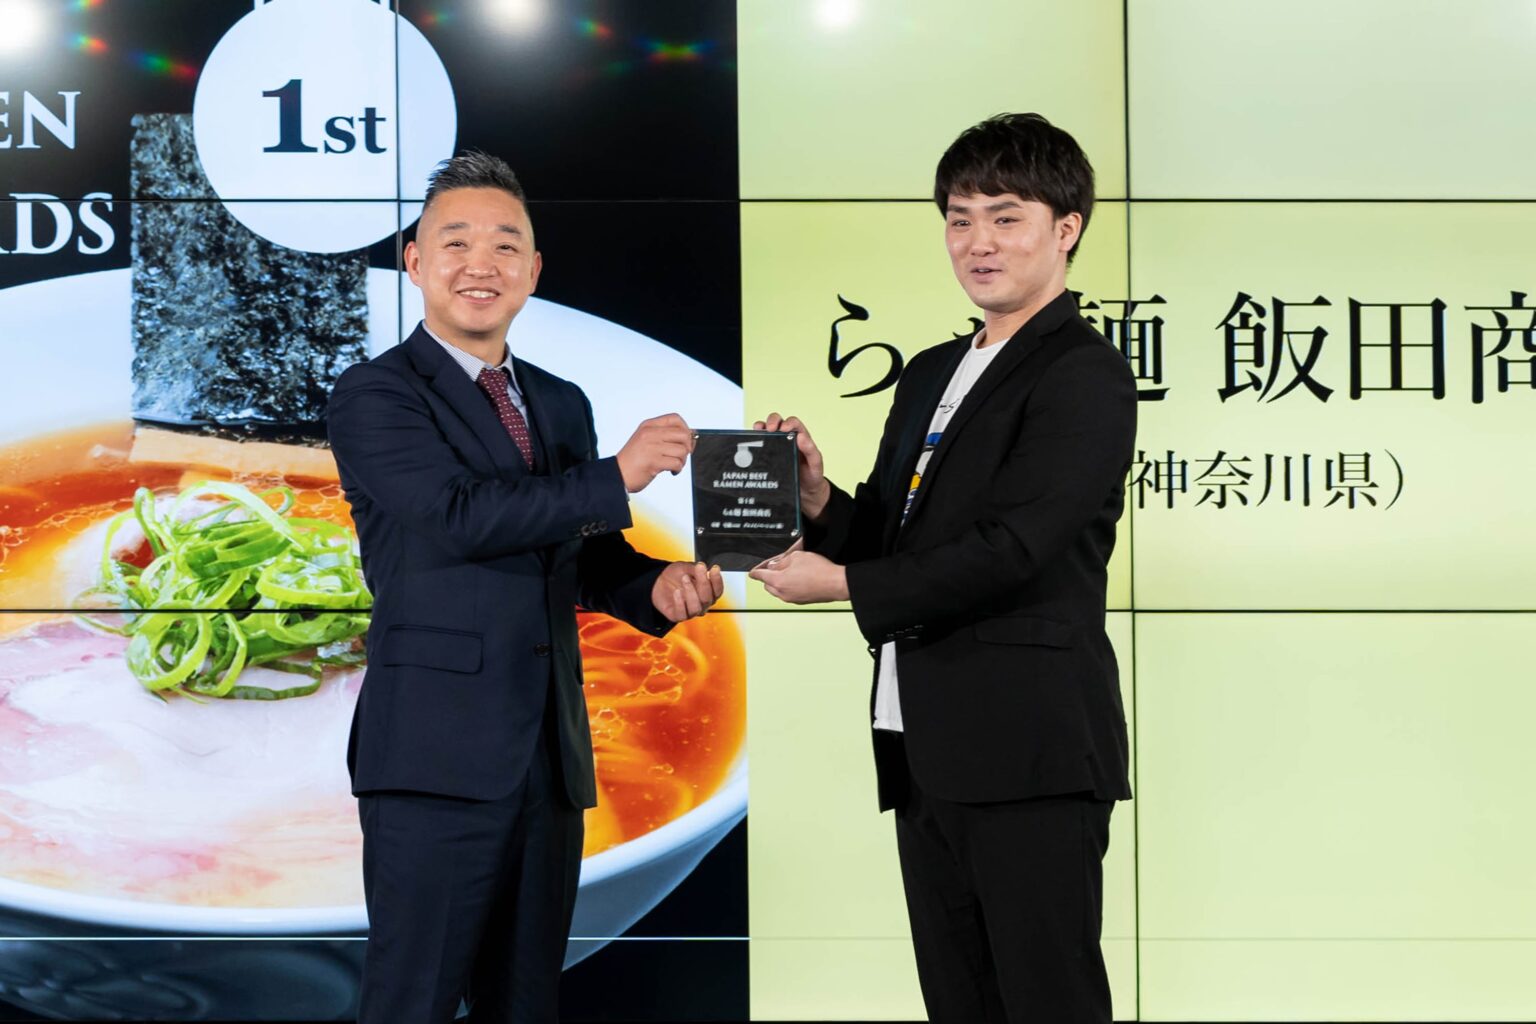 Results of the JAPAN BEST RAMEN AWARDS 2021 have been announced. Owners